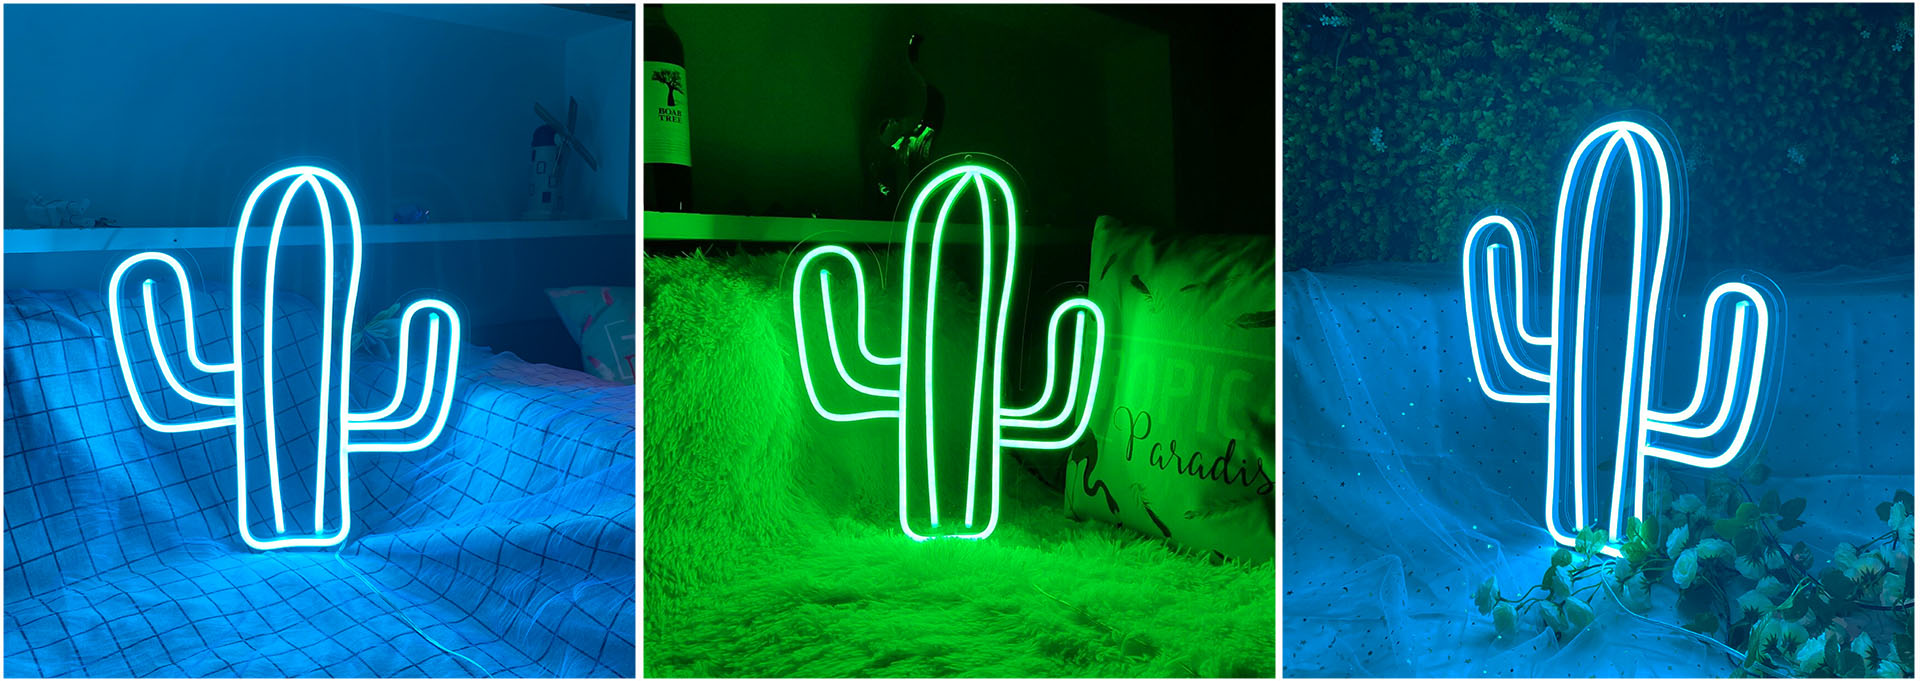 Cactus cool neon lamp light sign Real-life photography